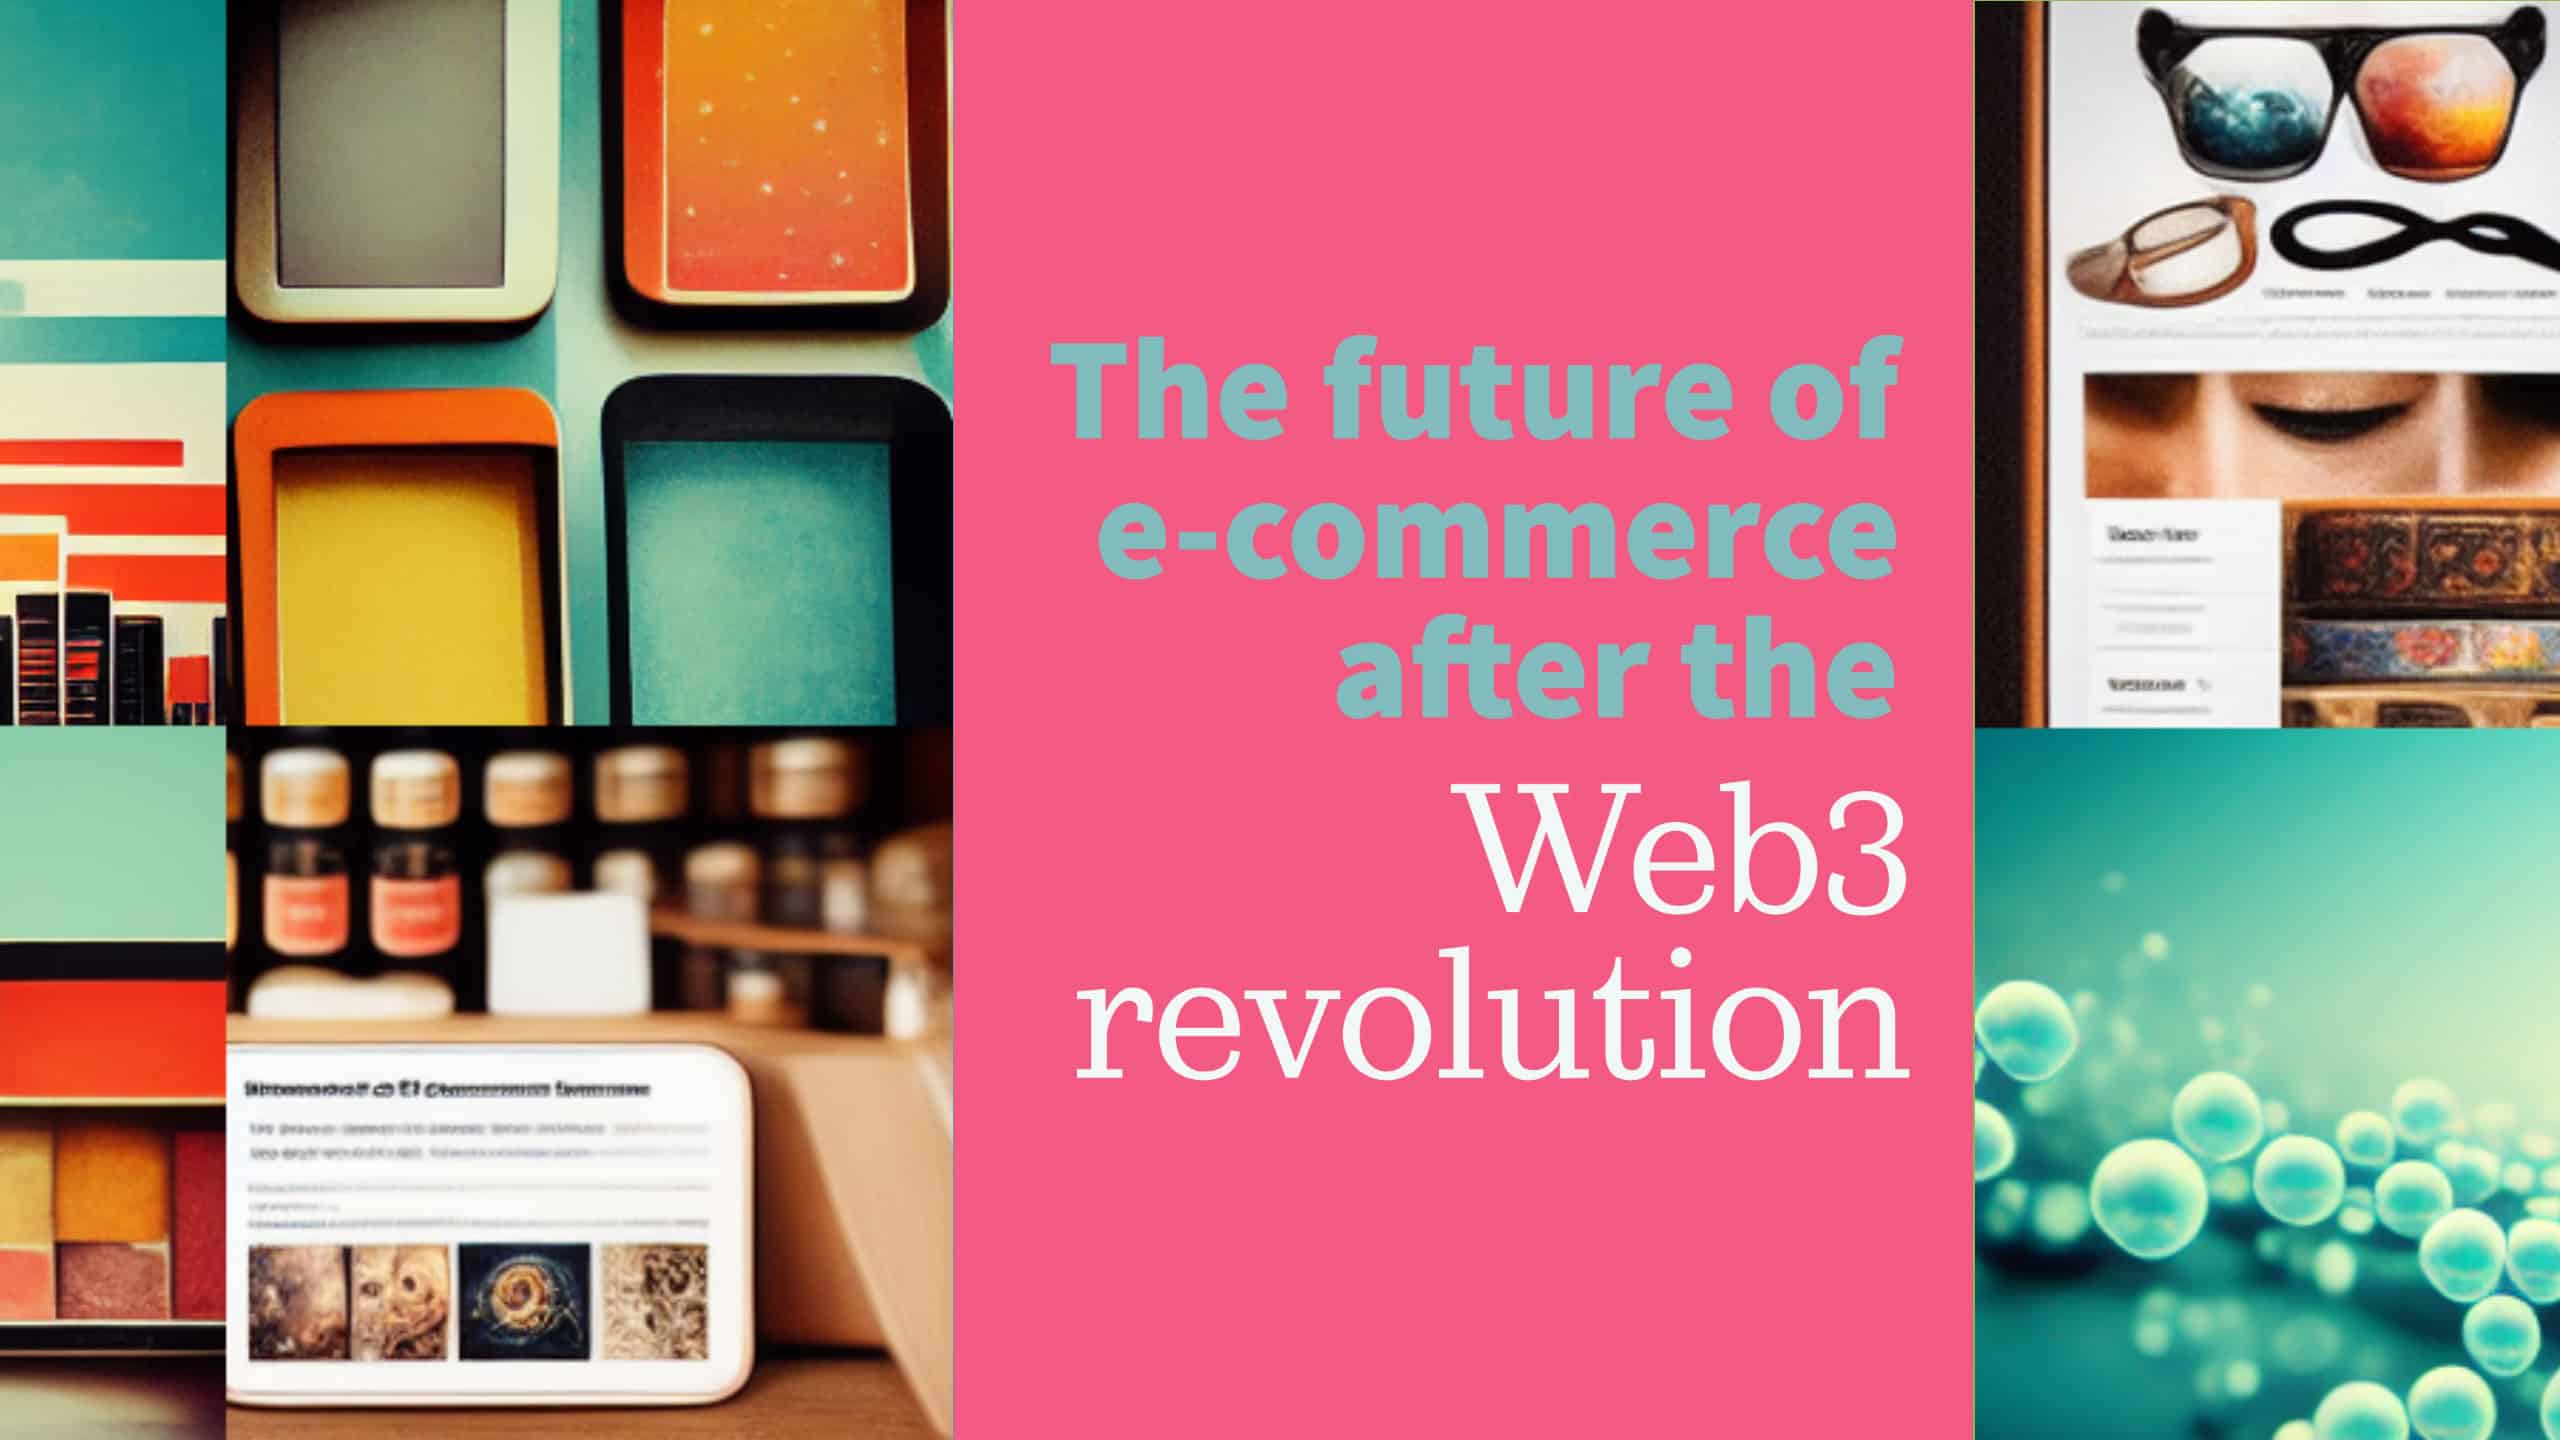 The future of e-commerce after the Web3 revolution